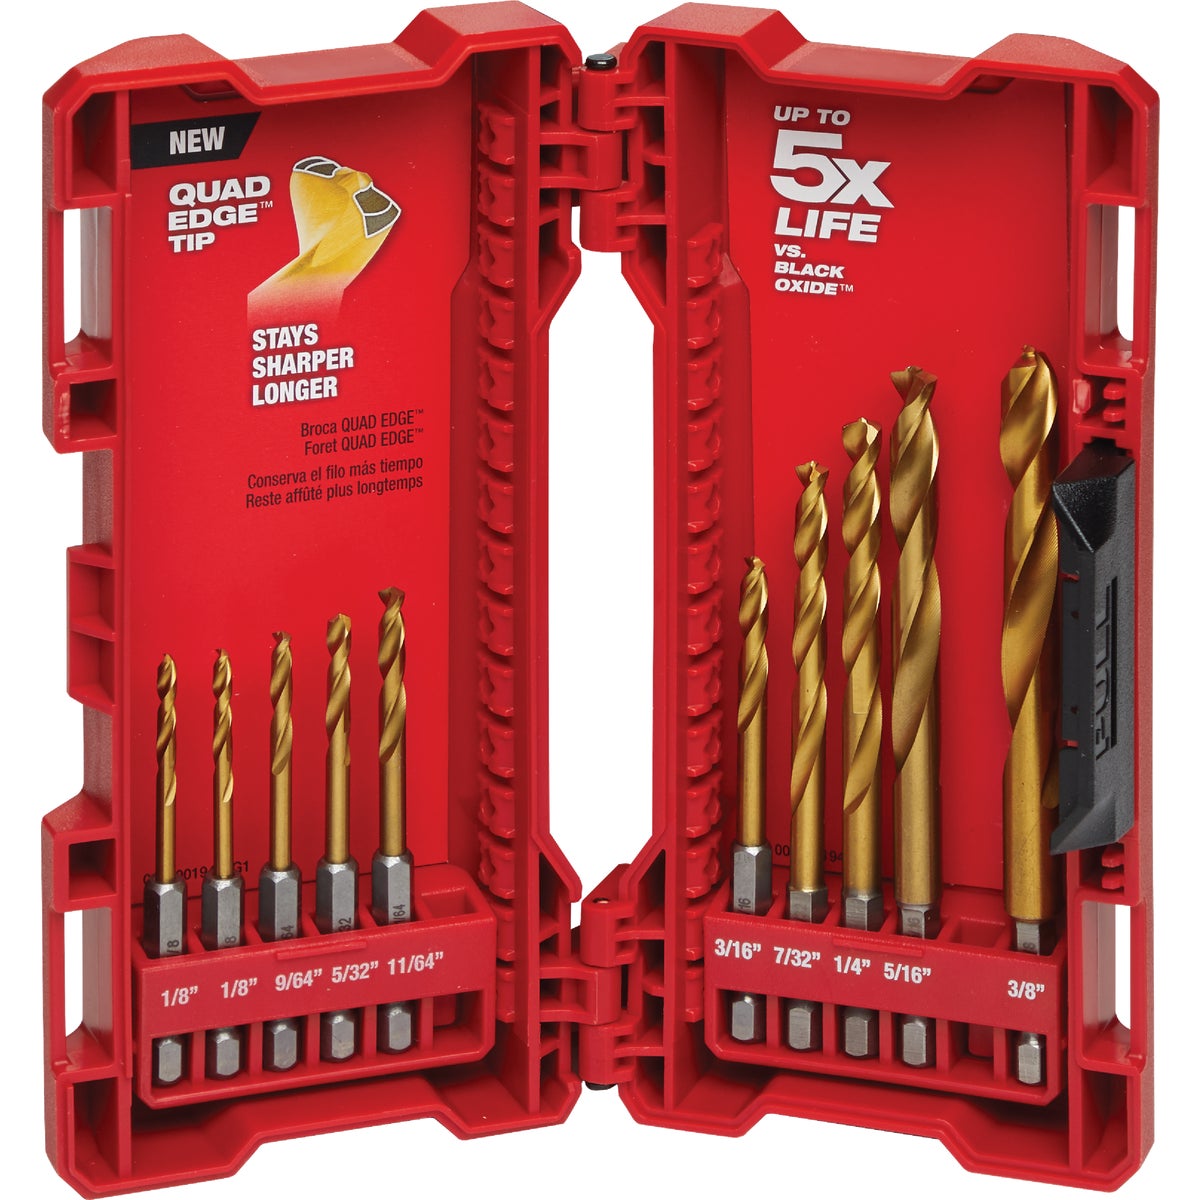 Item 303615, Shockwave Impact Duty titanium drill bits with Red Helix are engineered for